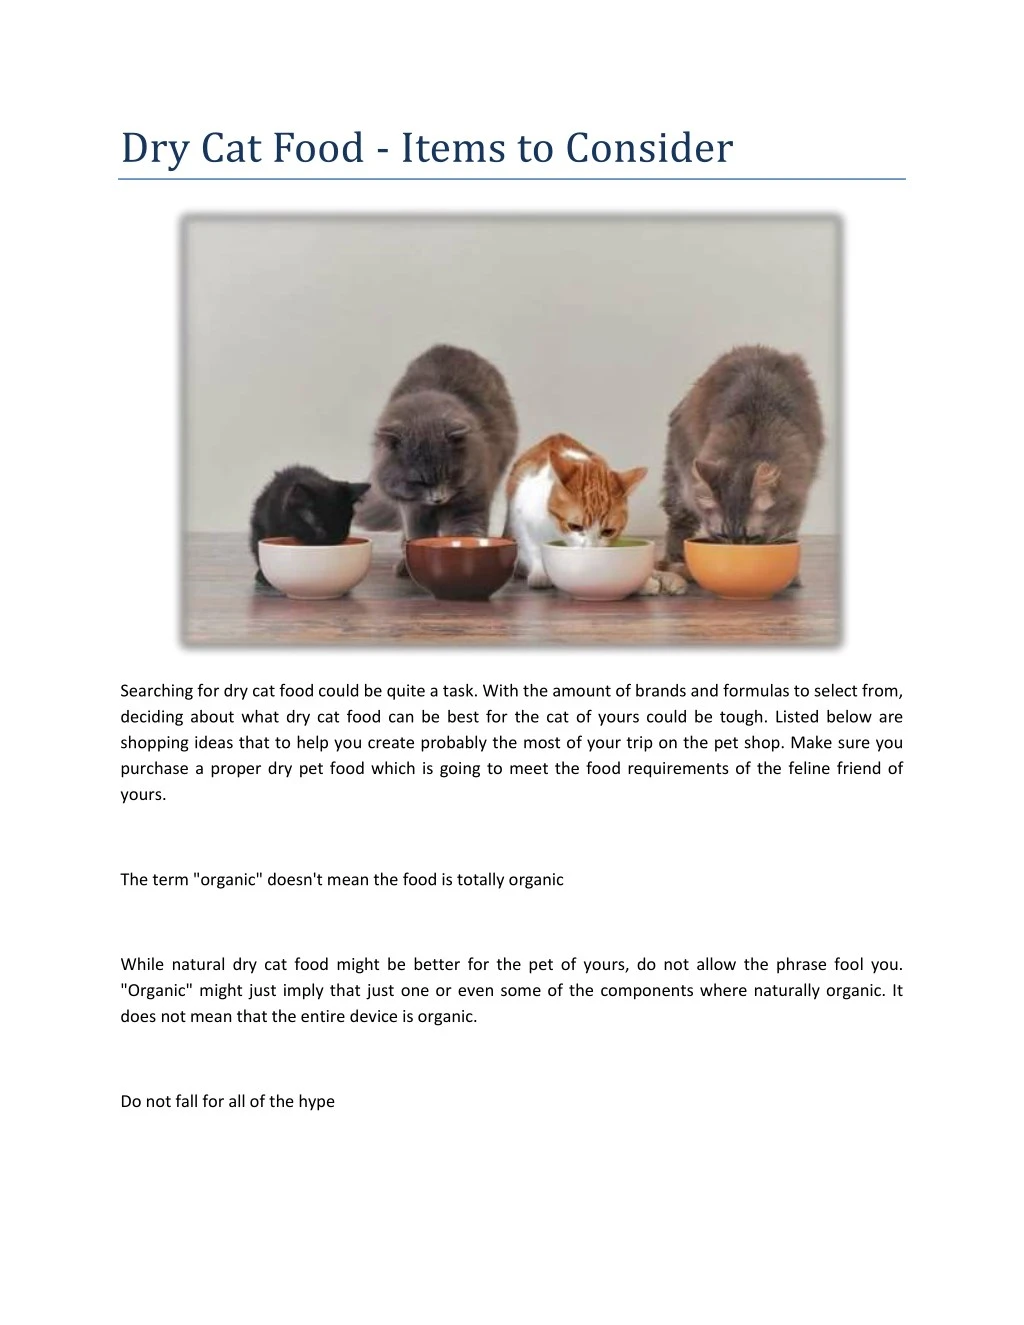 dry cat food items to consider